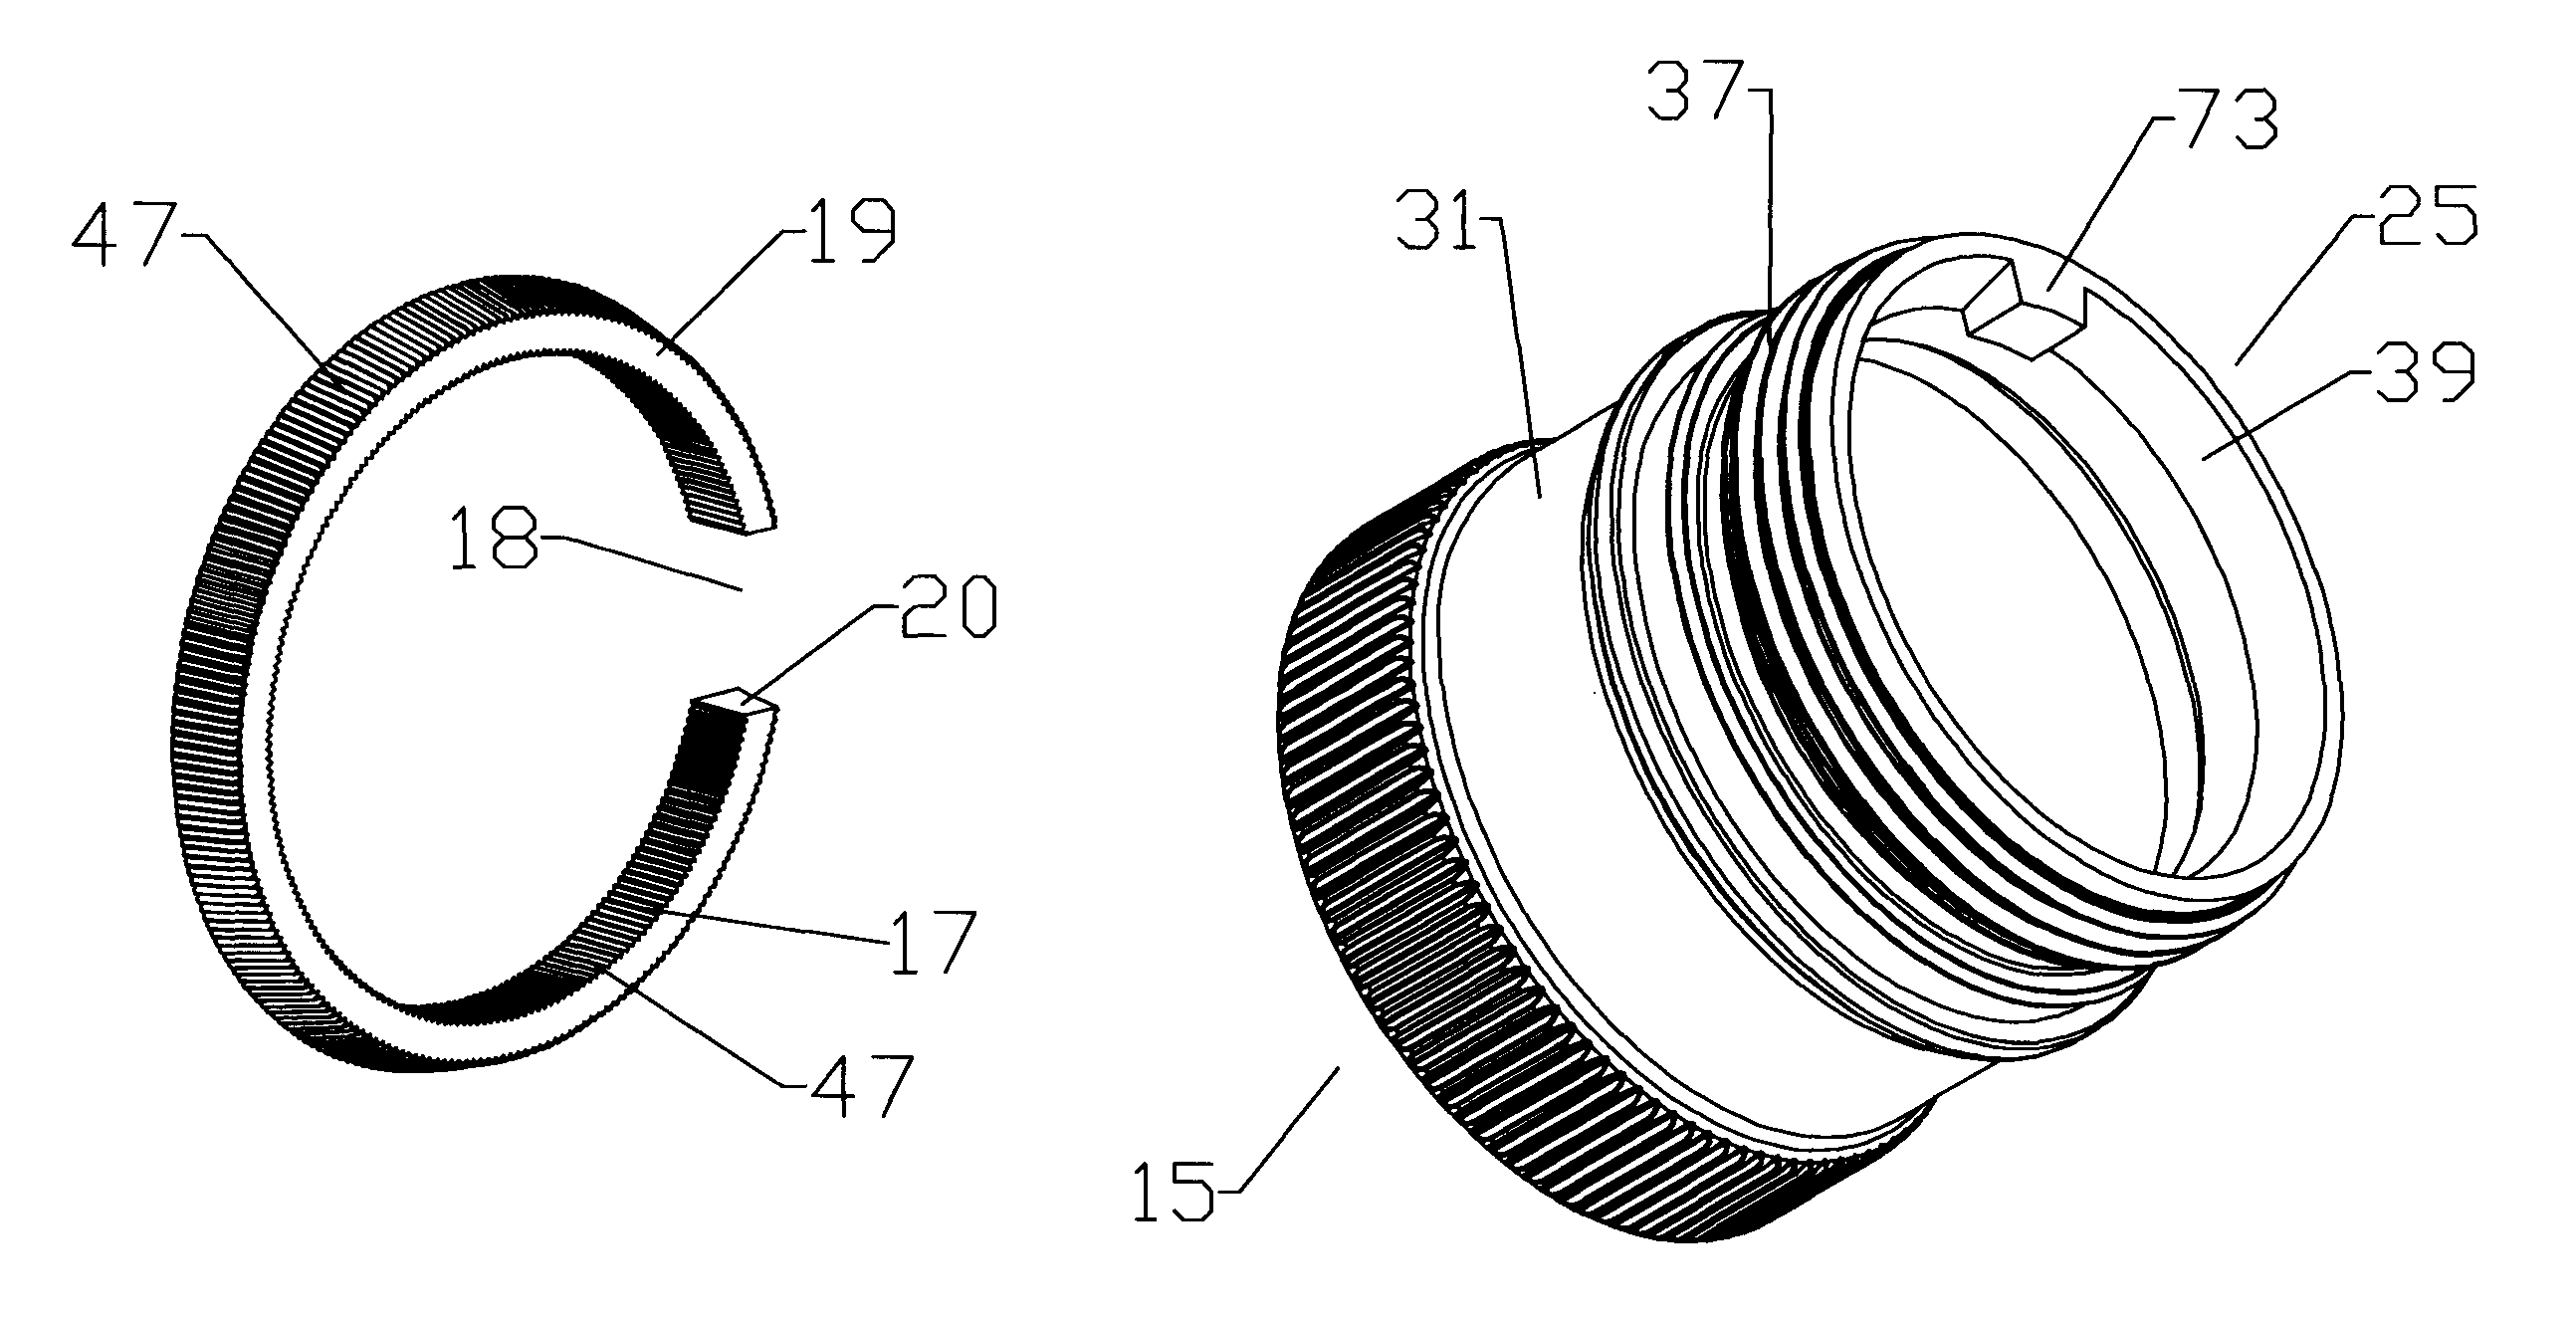 Coaxial connector grip ring having an anti-rotation feature